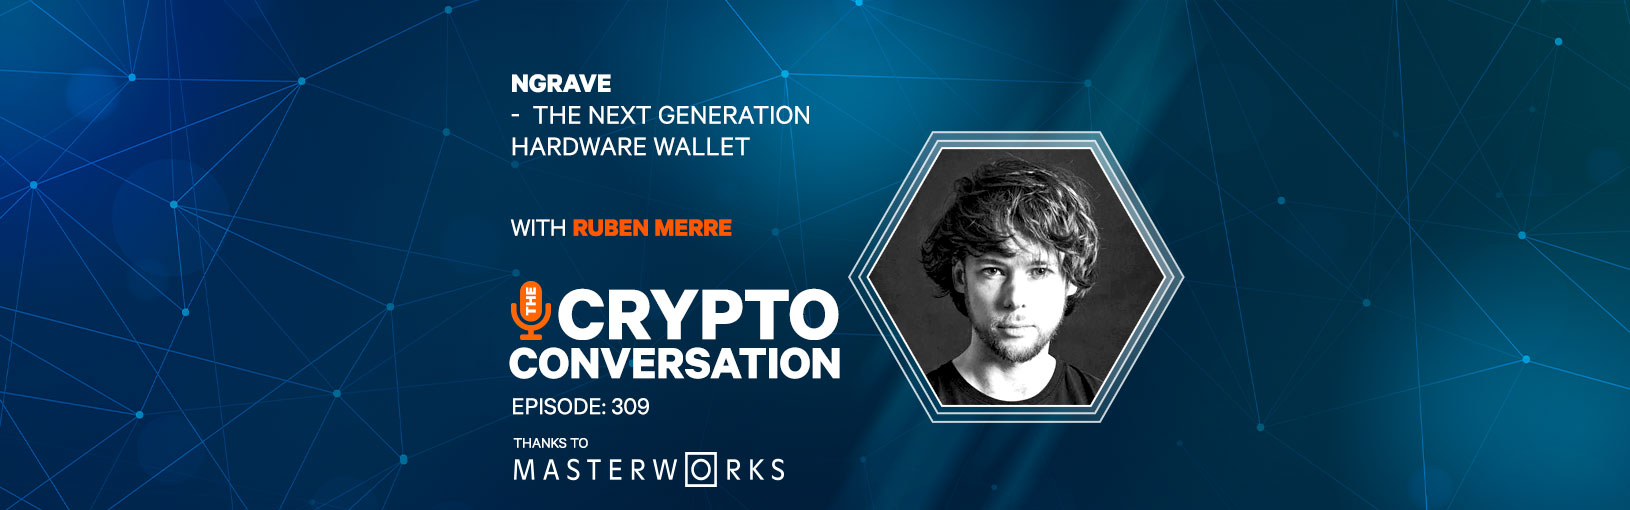 NGRAVE – the next generation hardware wallet